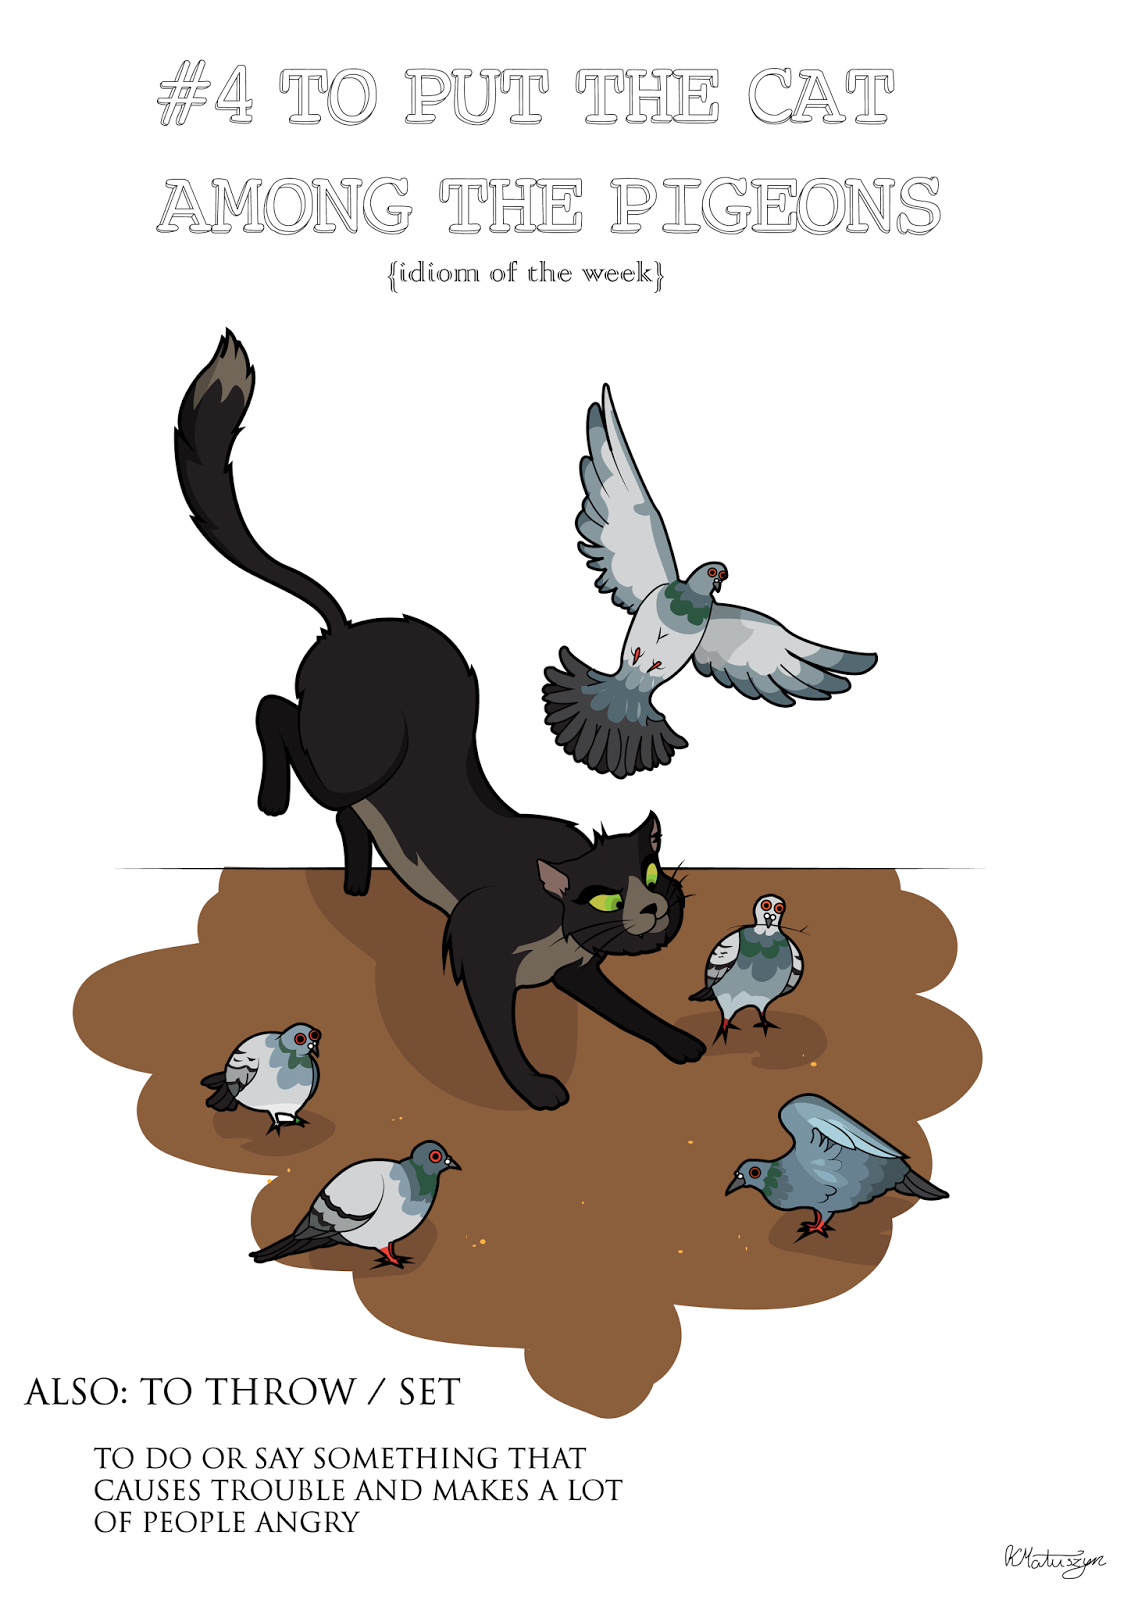 Put the cat among the pigeons